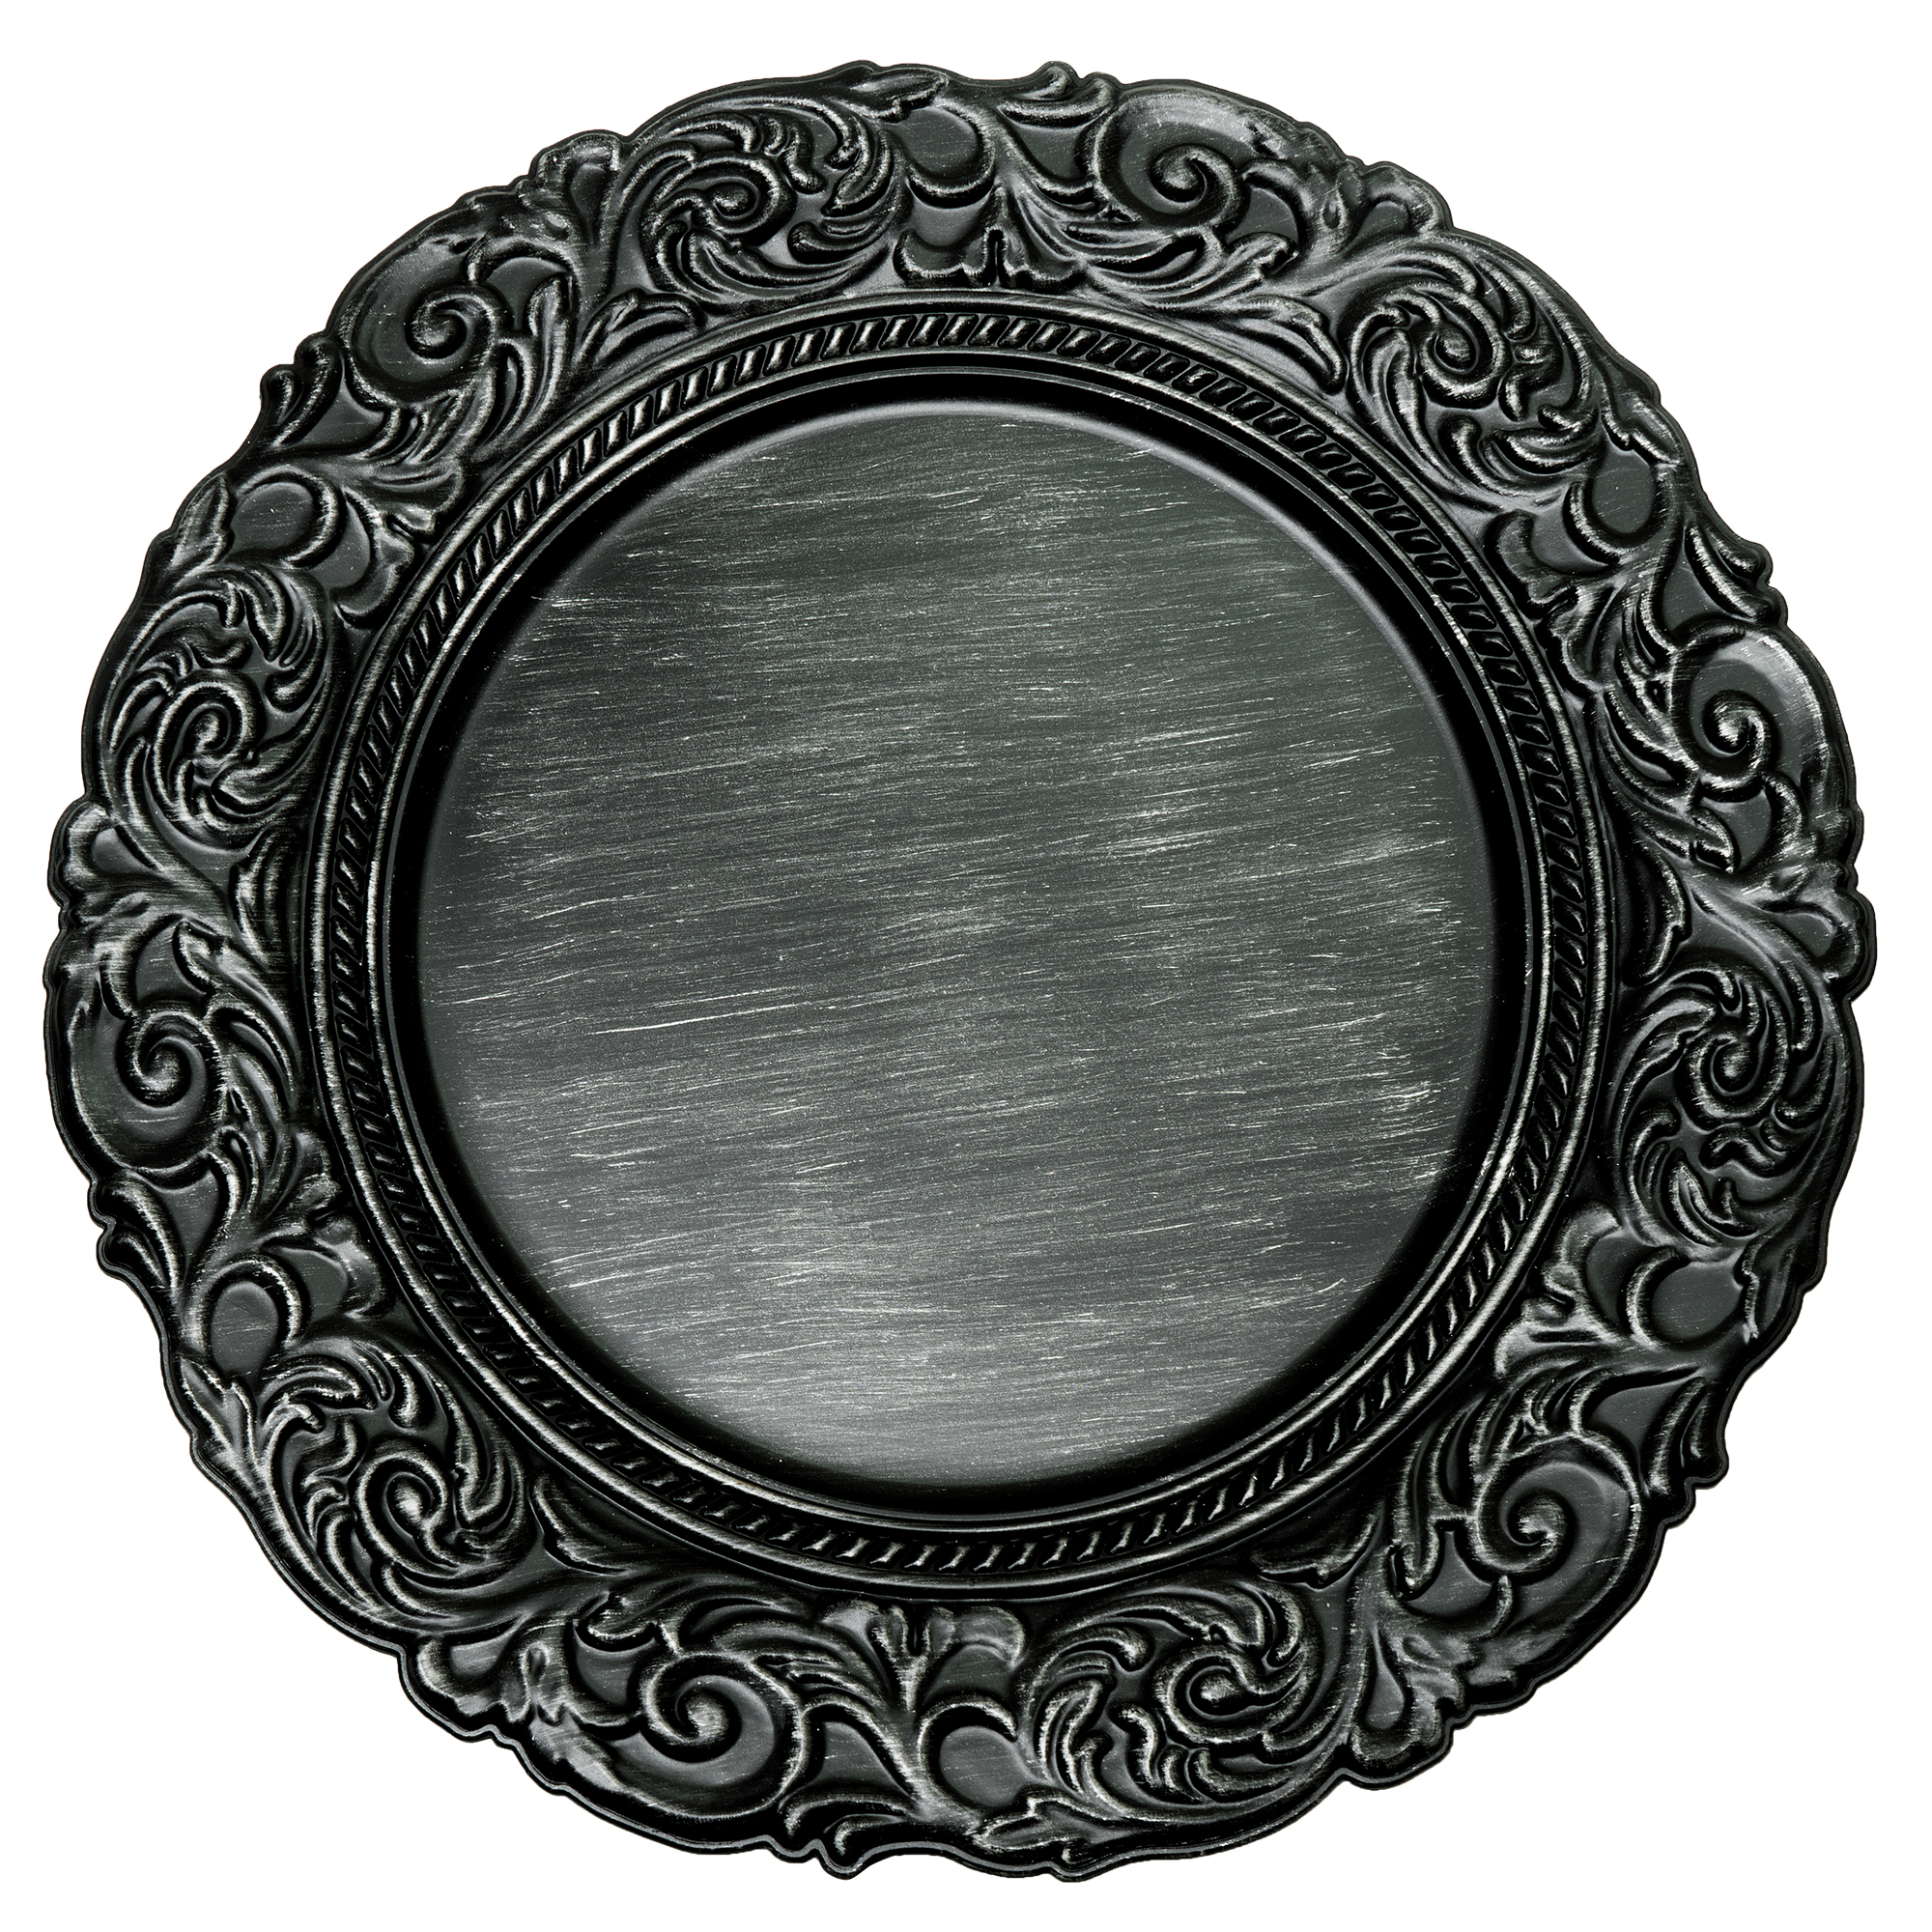 Antique Look Plastic Charger Plate 14" - Black